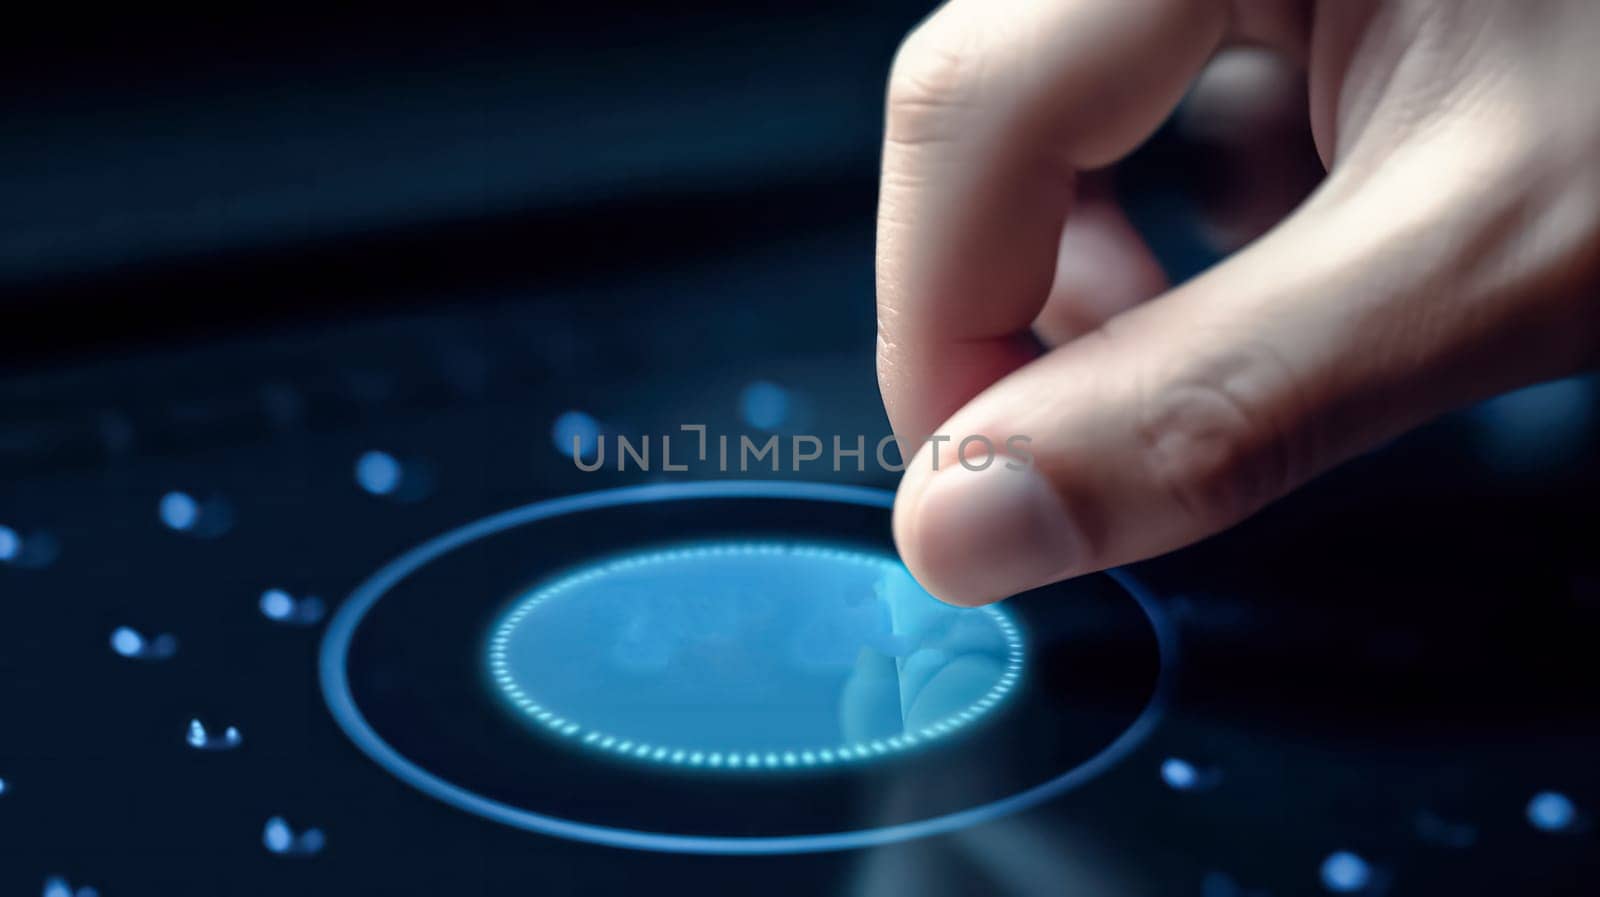 A man is pointing at a computer screen with a blue button in the middle. Concept of focus and determination as the man is trying to figure out what the button does